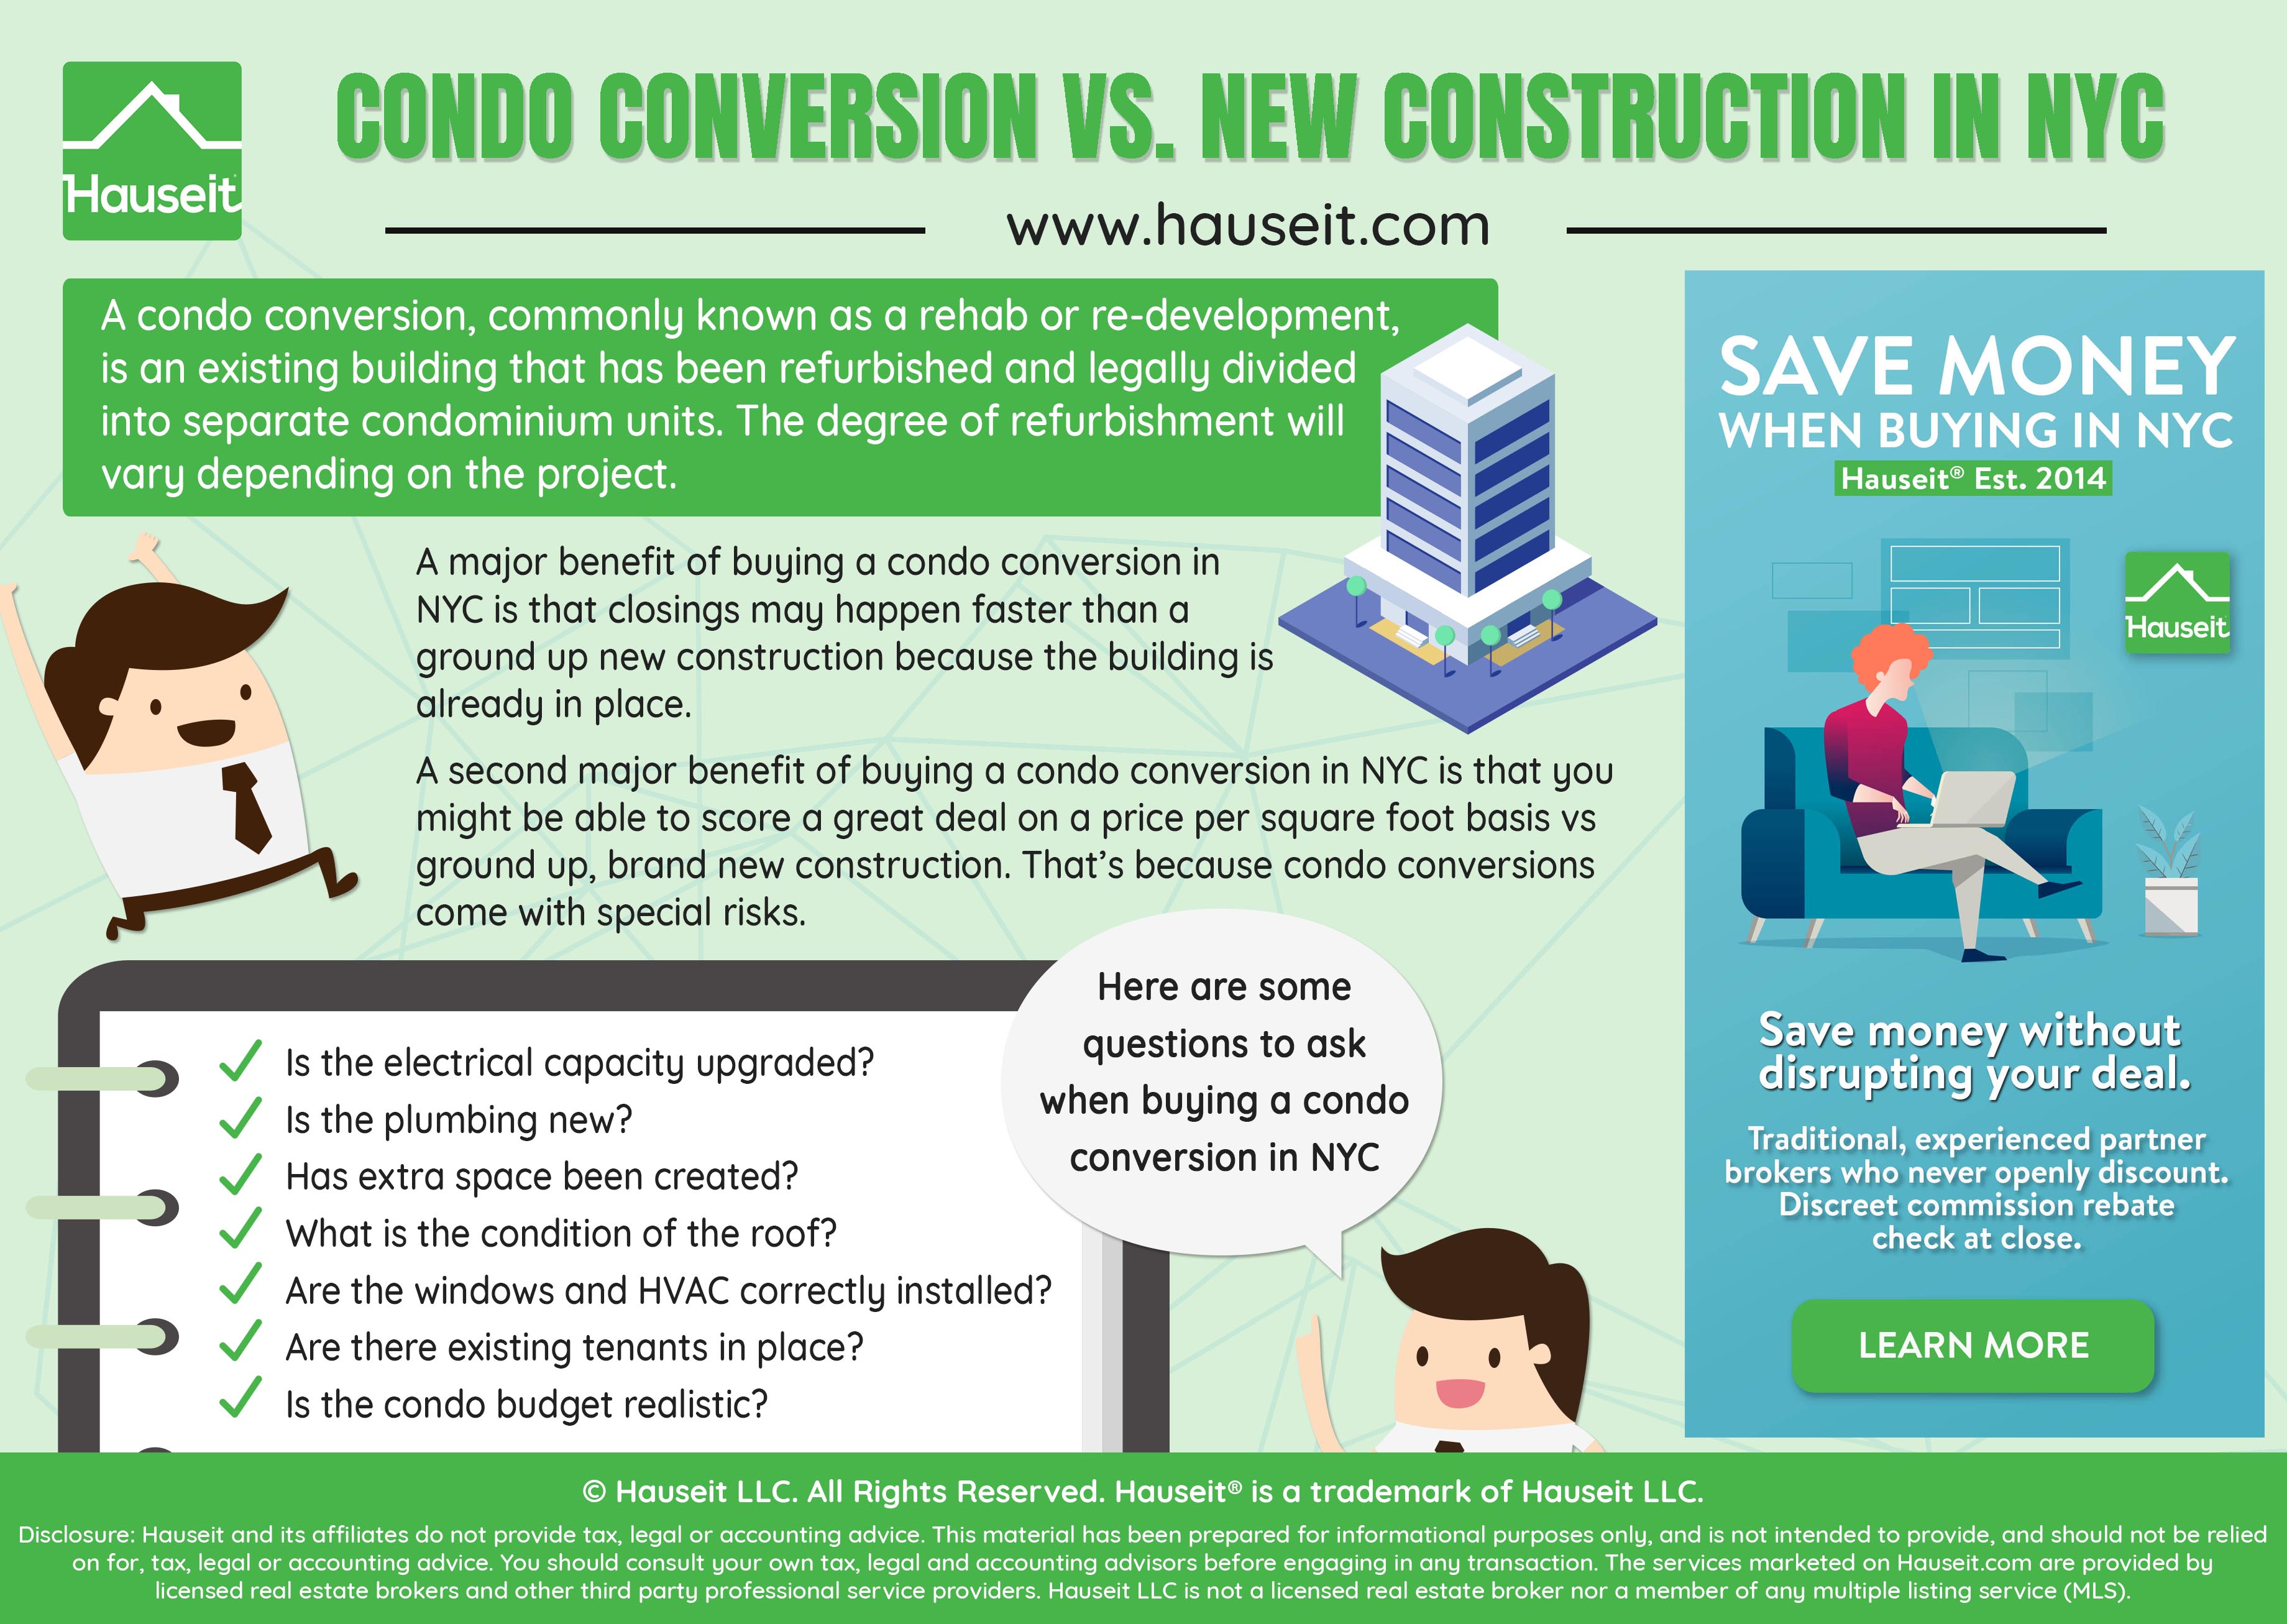 Buying a condominium conversion, rehabilitation or re-development is very different from buying a new construction condo in New York City.